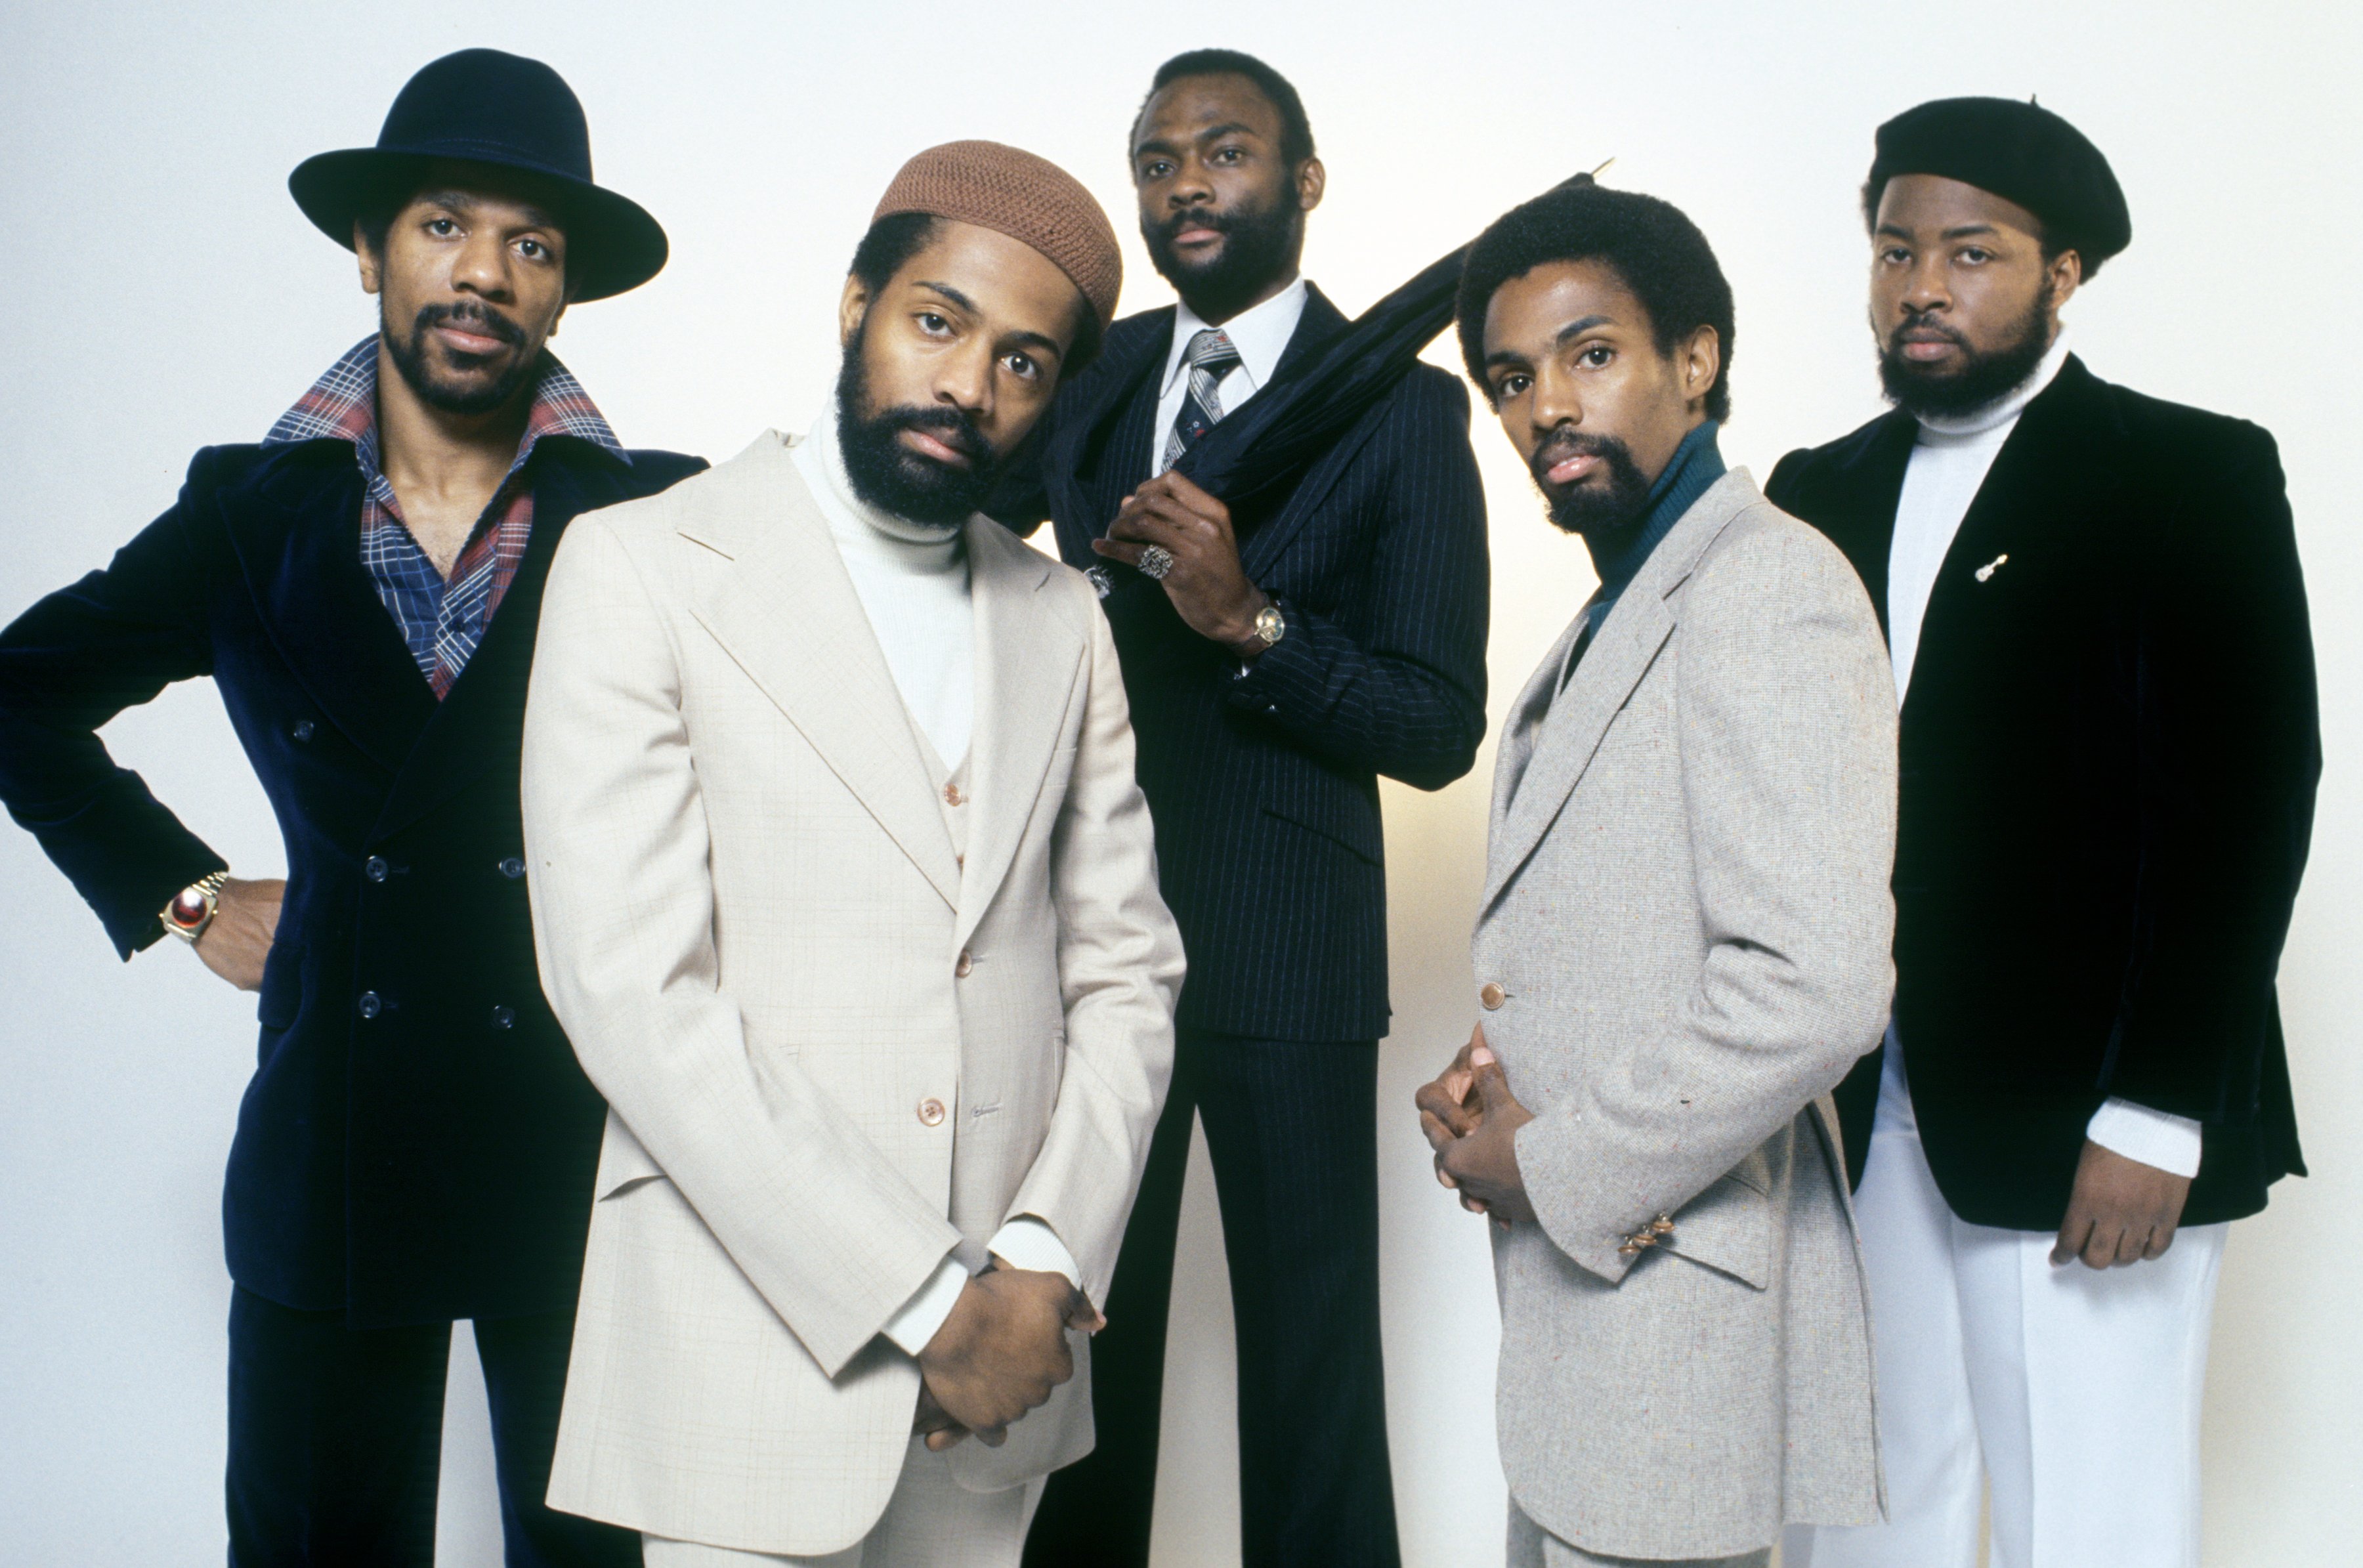 Kool & the Gang wearing suits